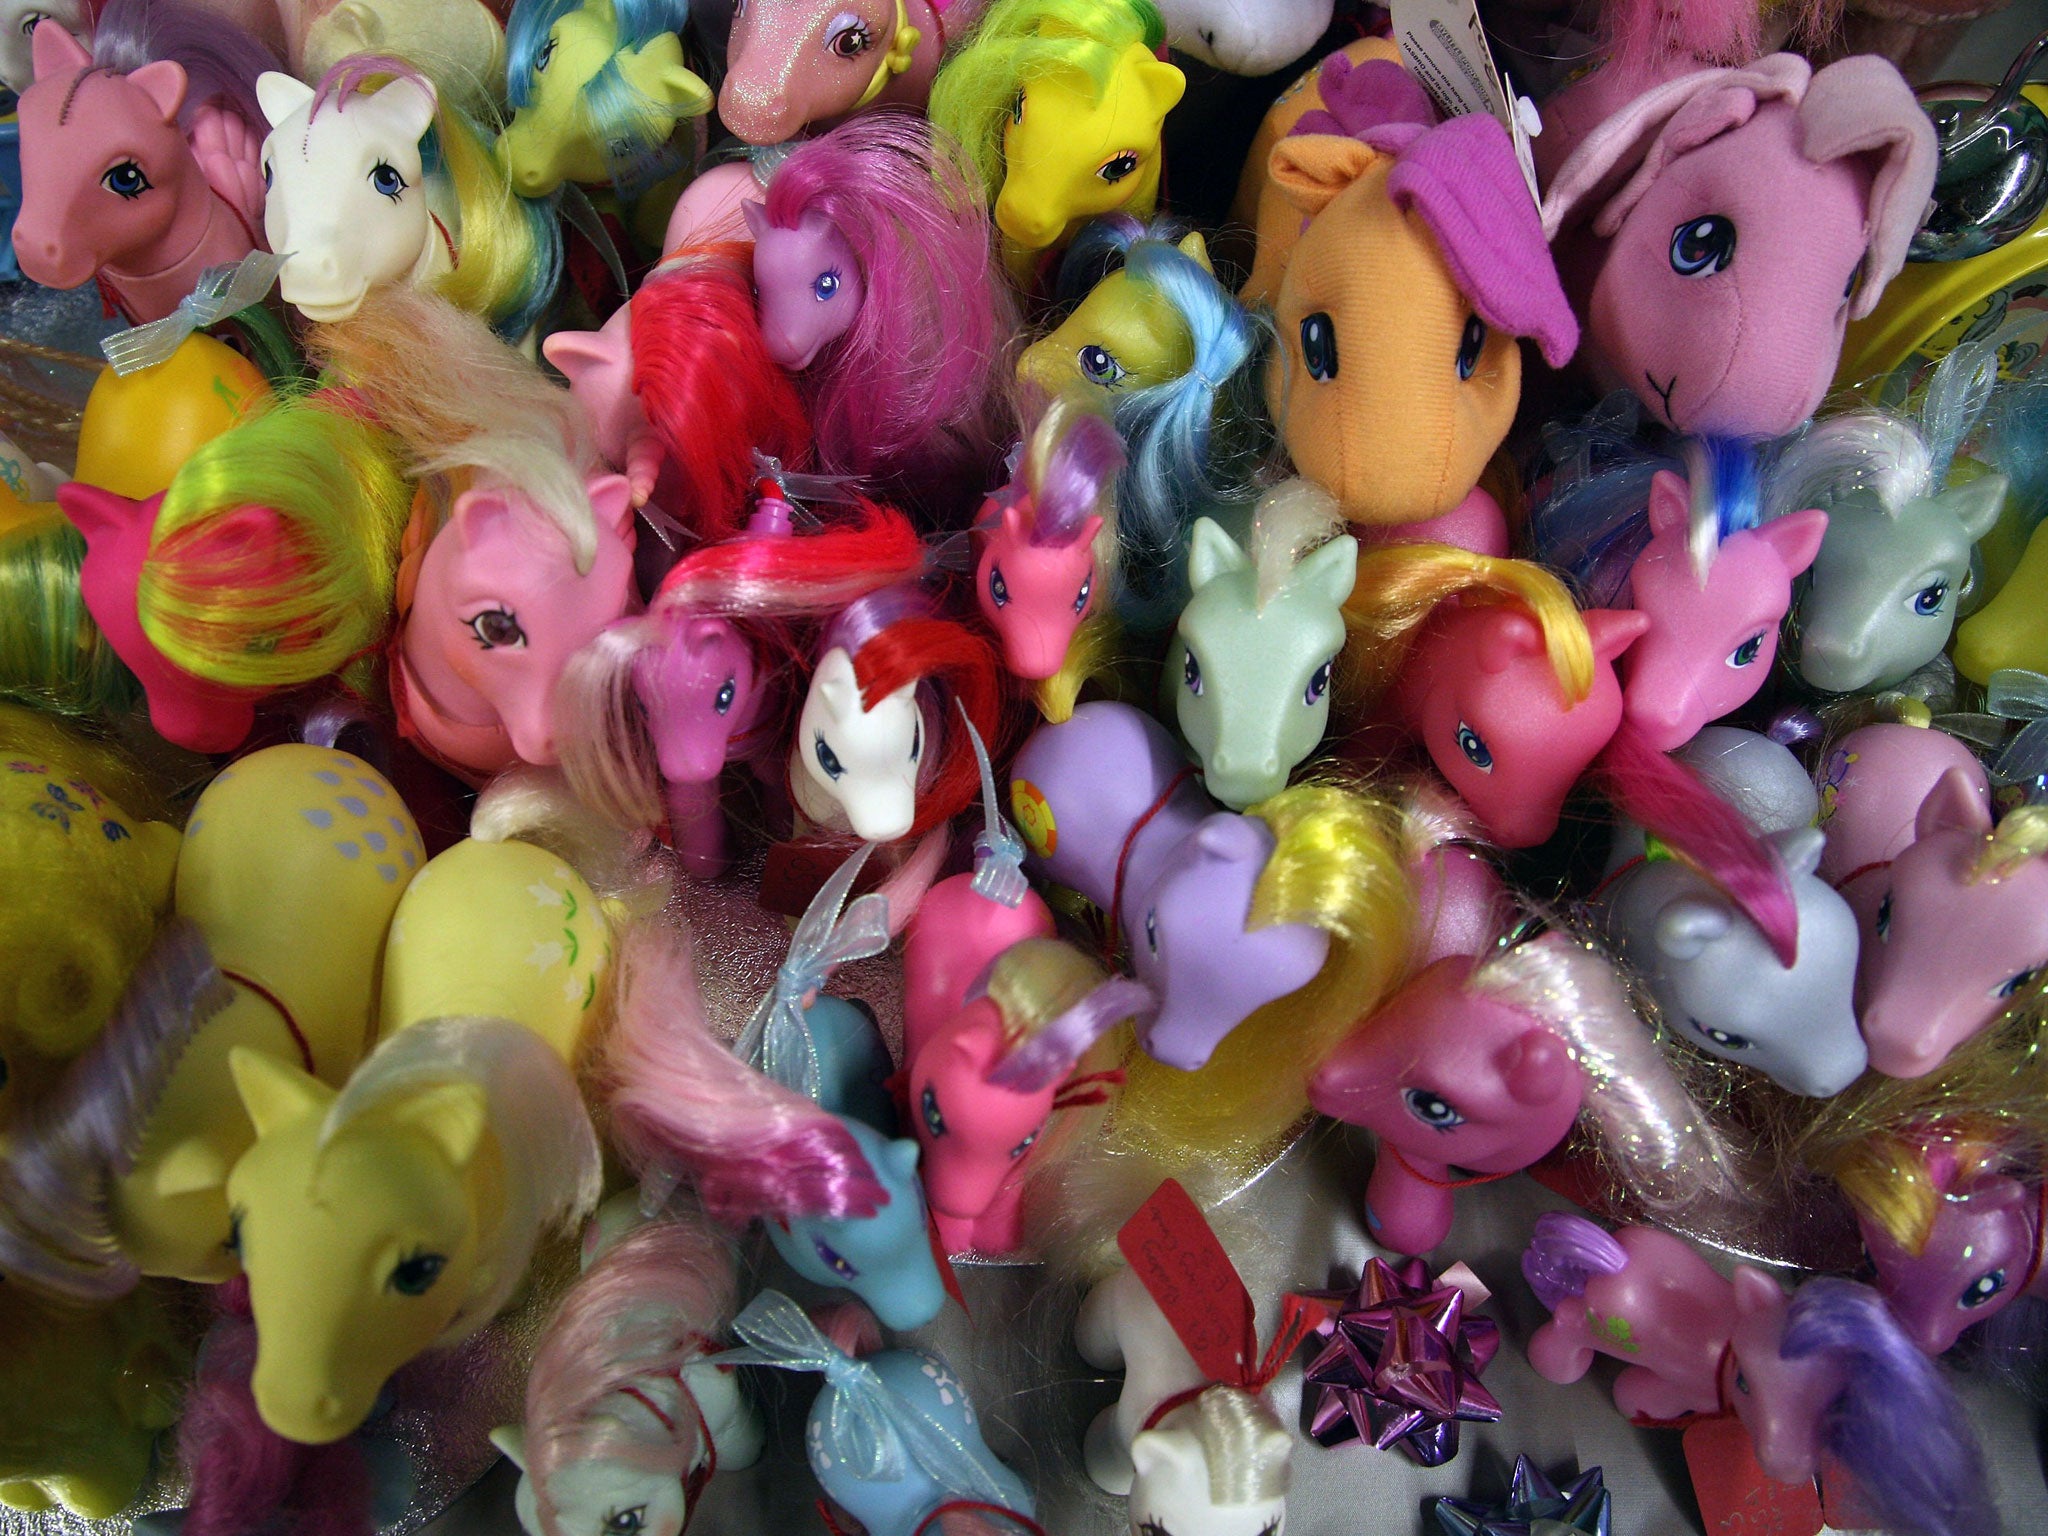 A collection of my Little Pony dolls.